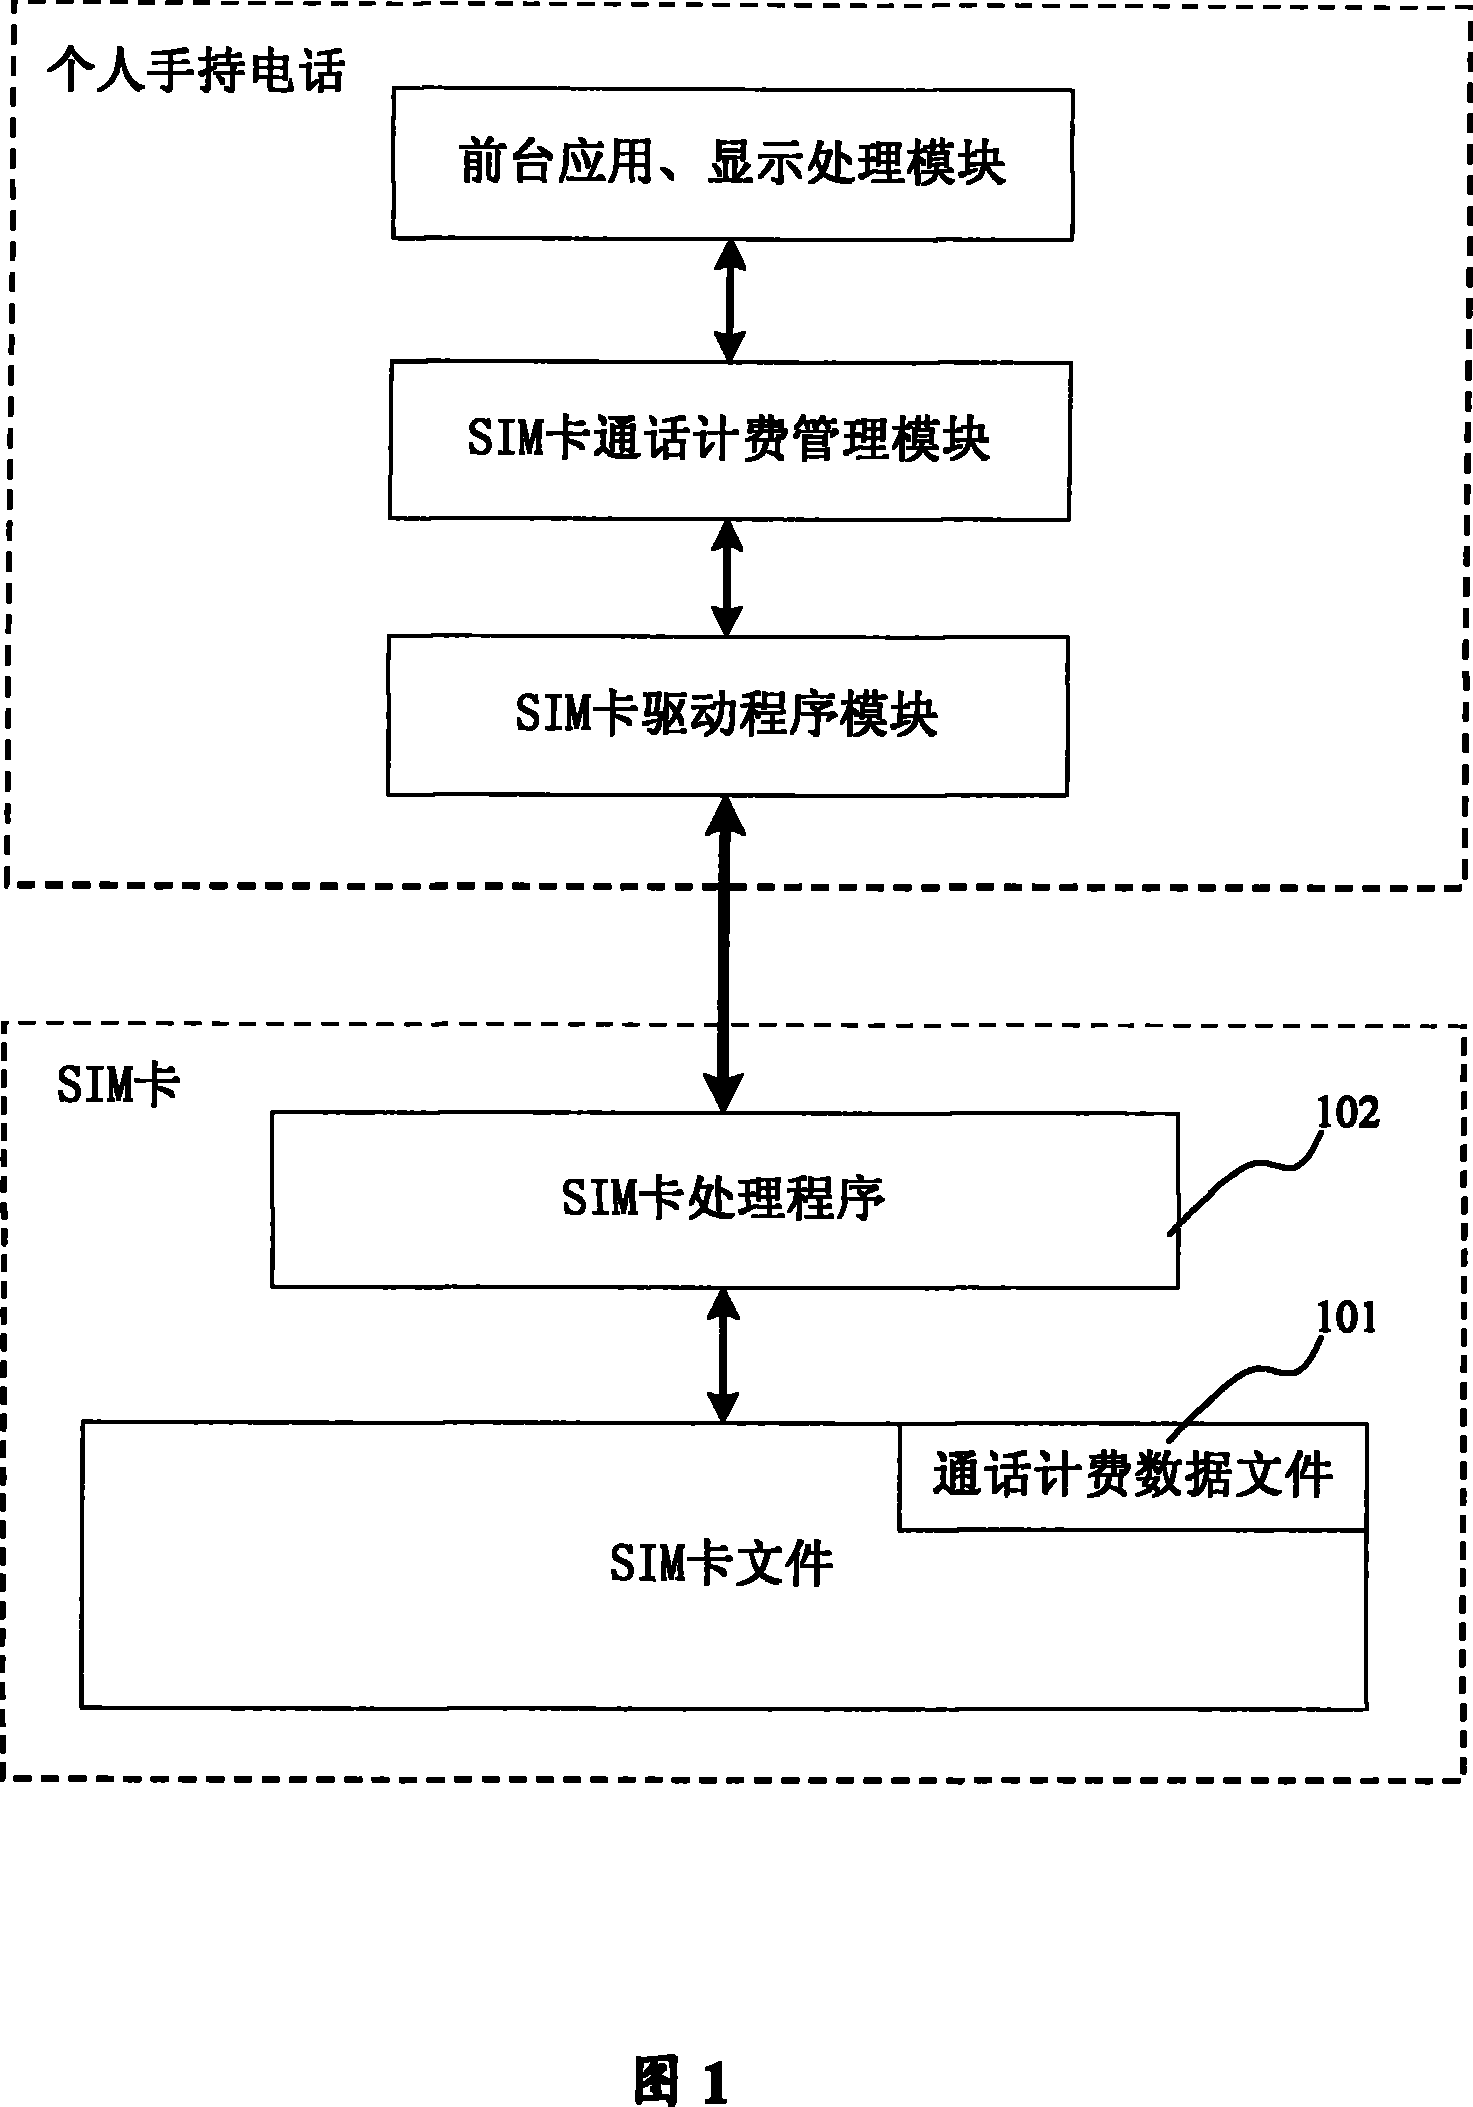 Method and apparatus for implementing mobile phone call charging function